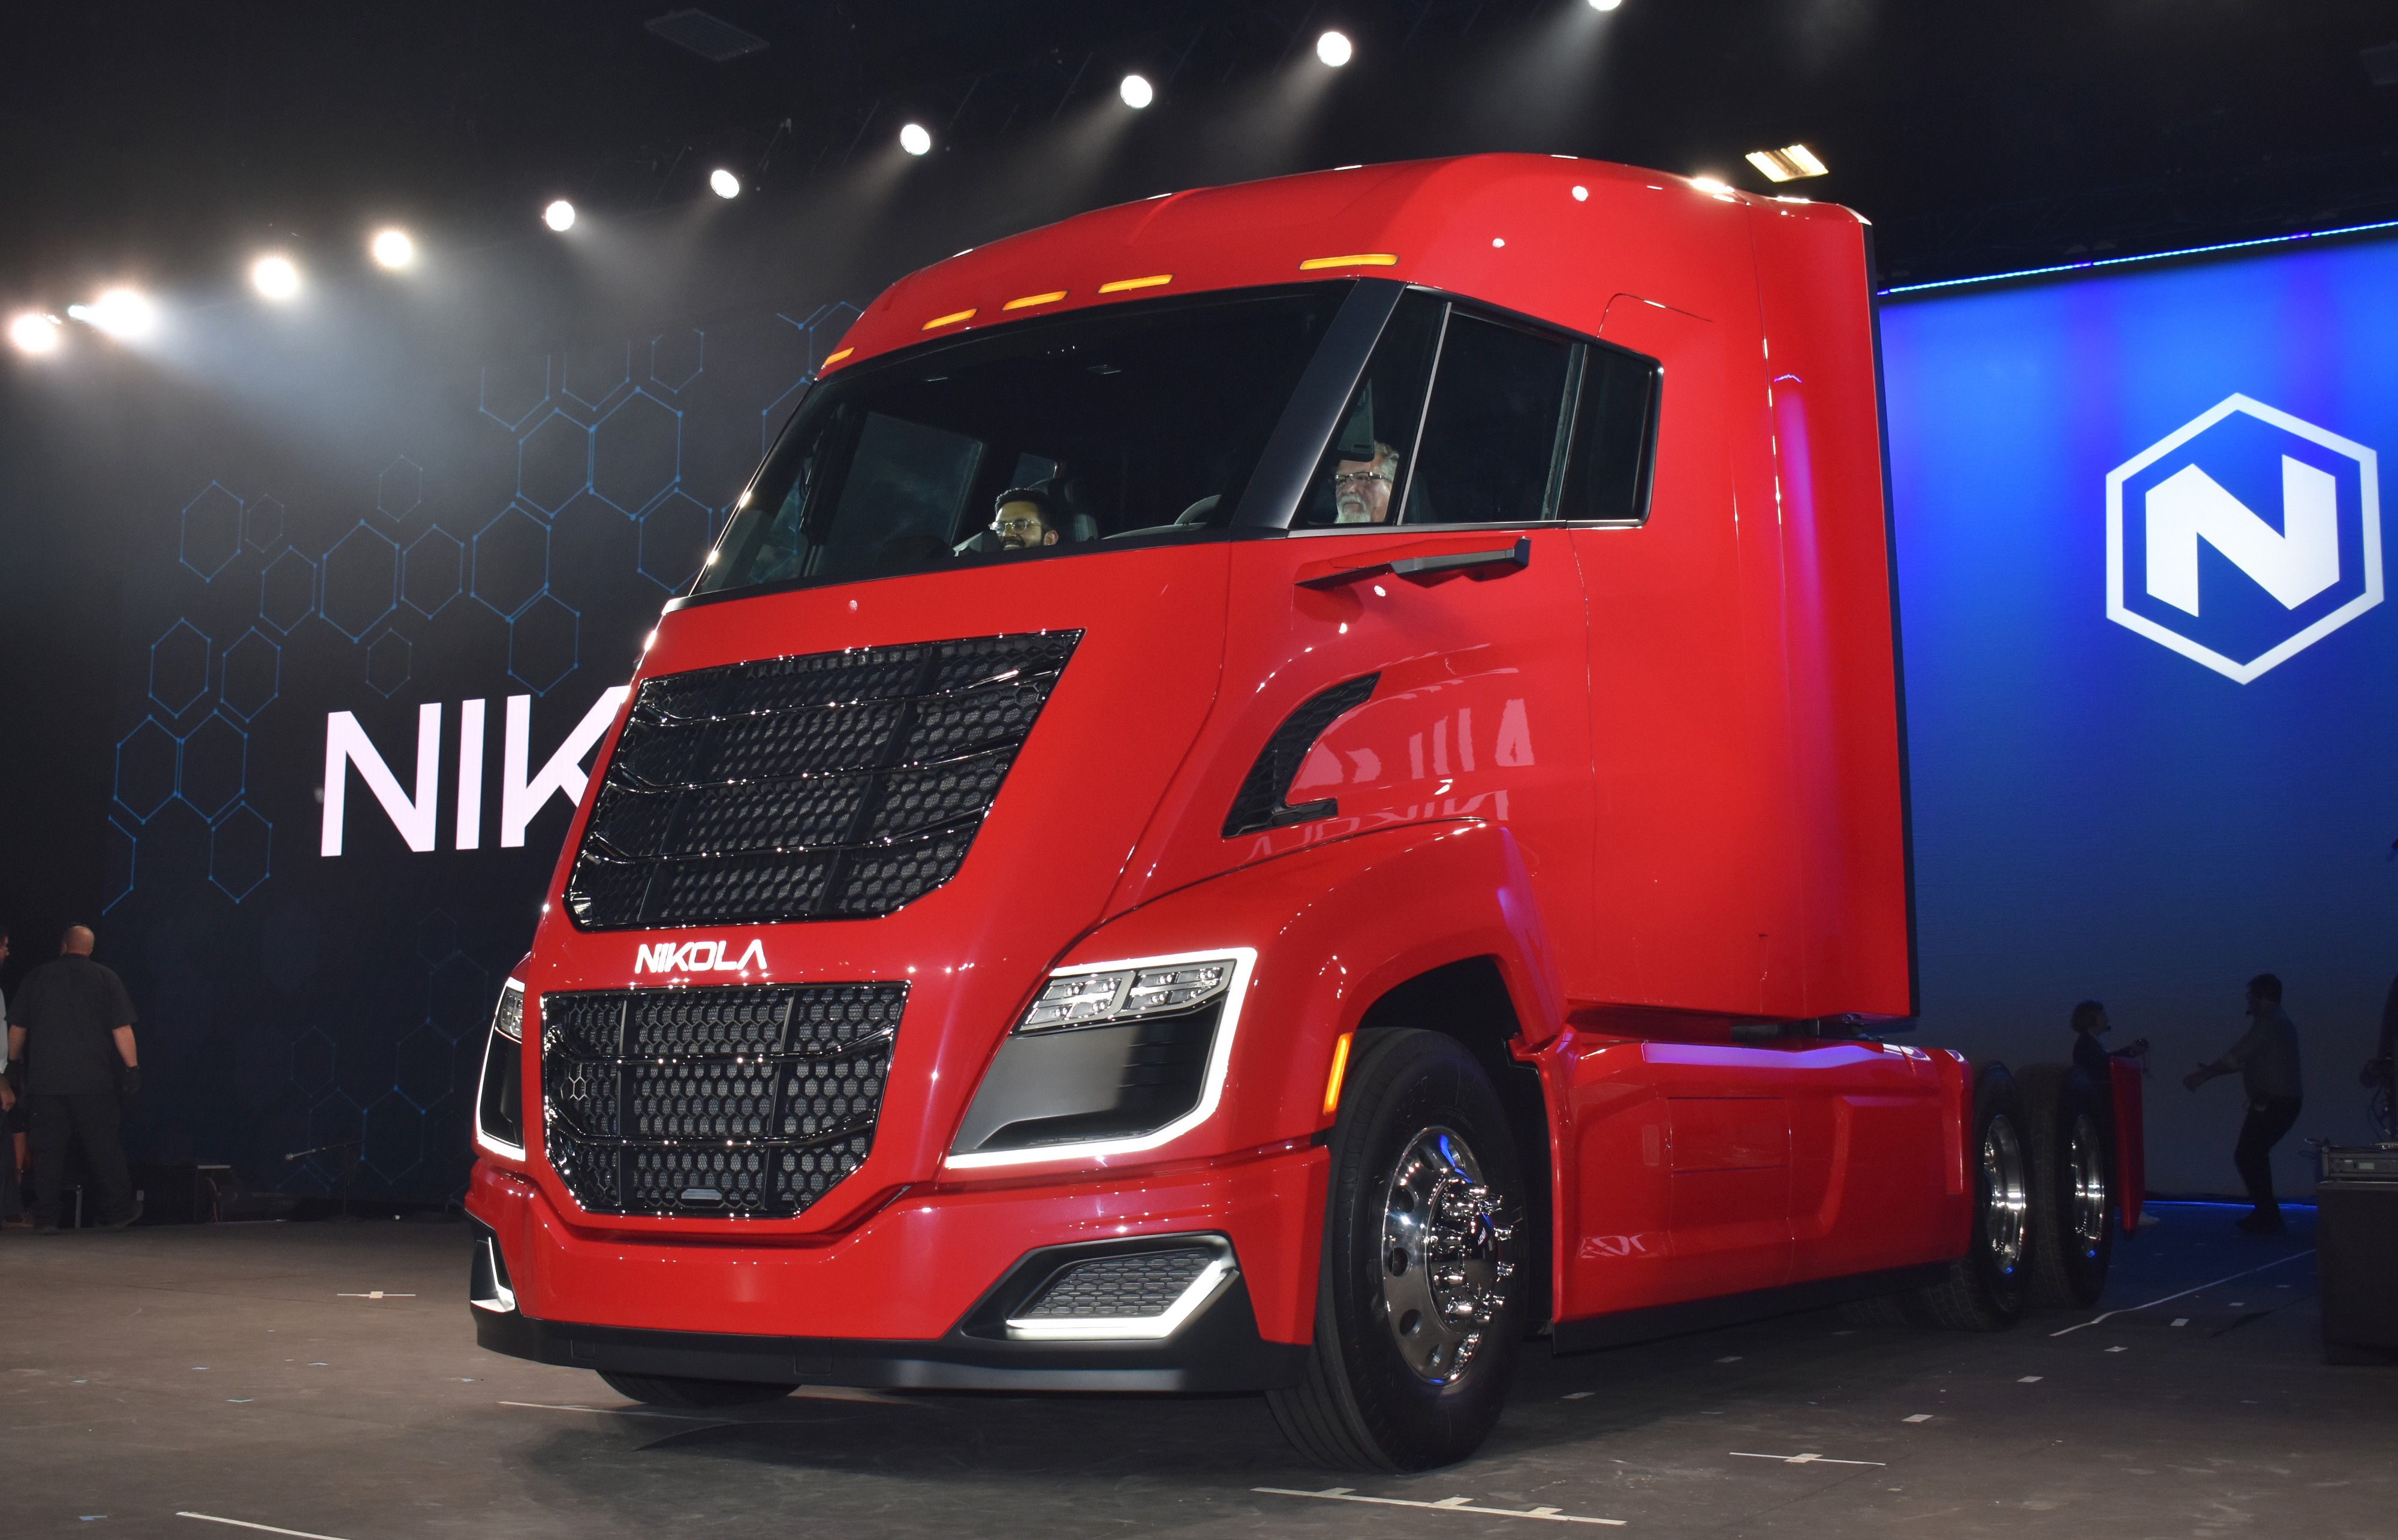 Nikola Reveals Range of Hydrogen Fuel Cell and BatteryElectric